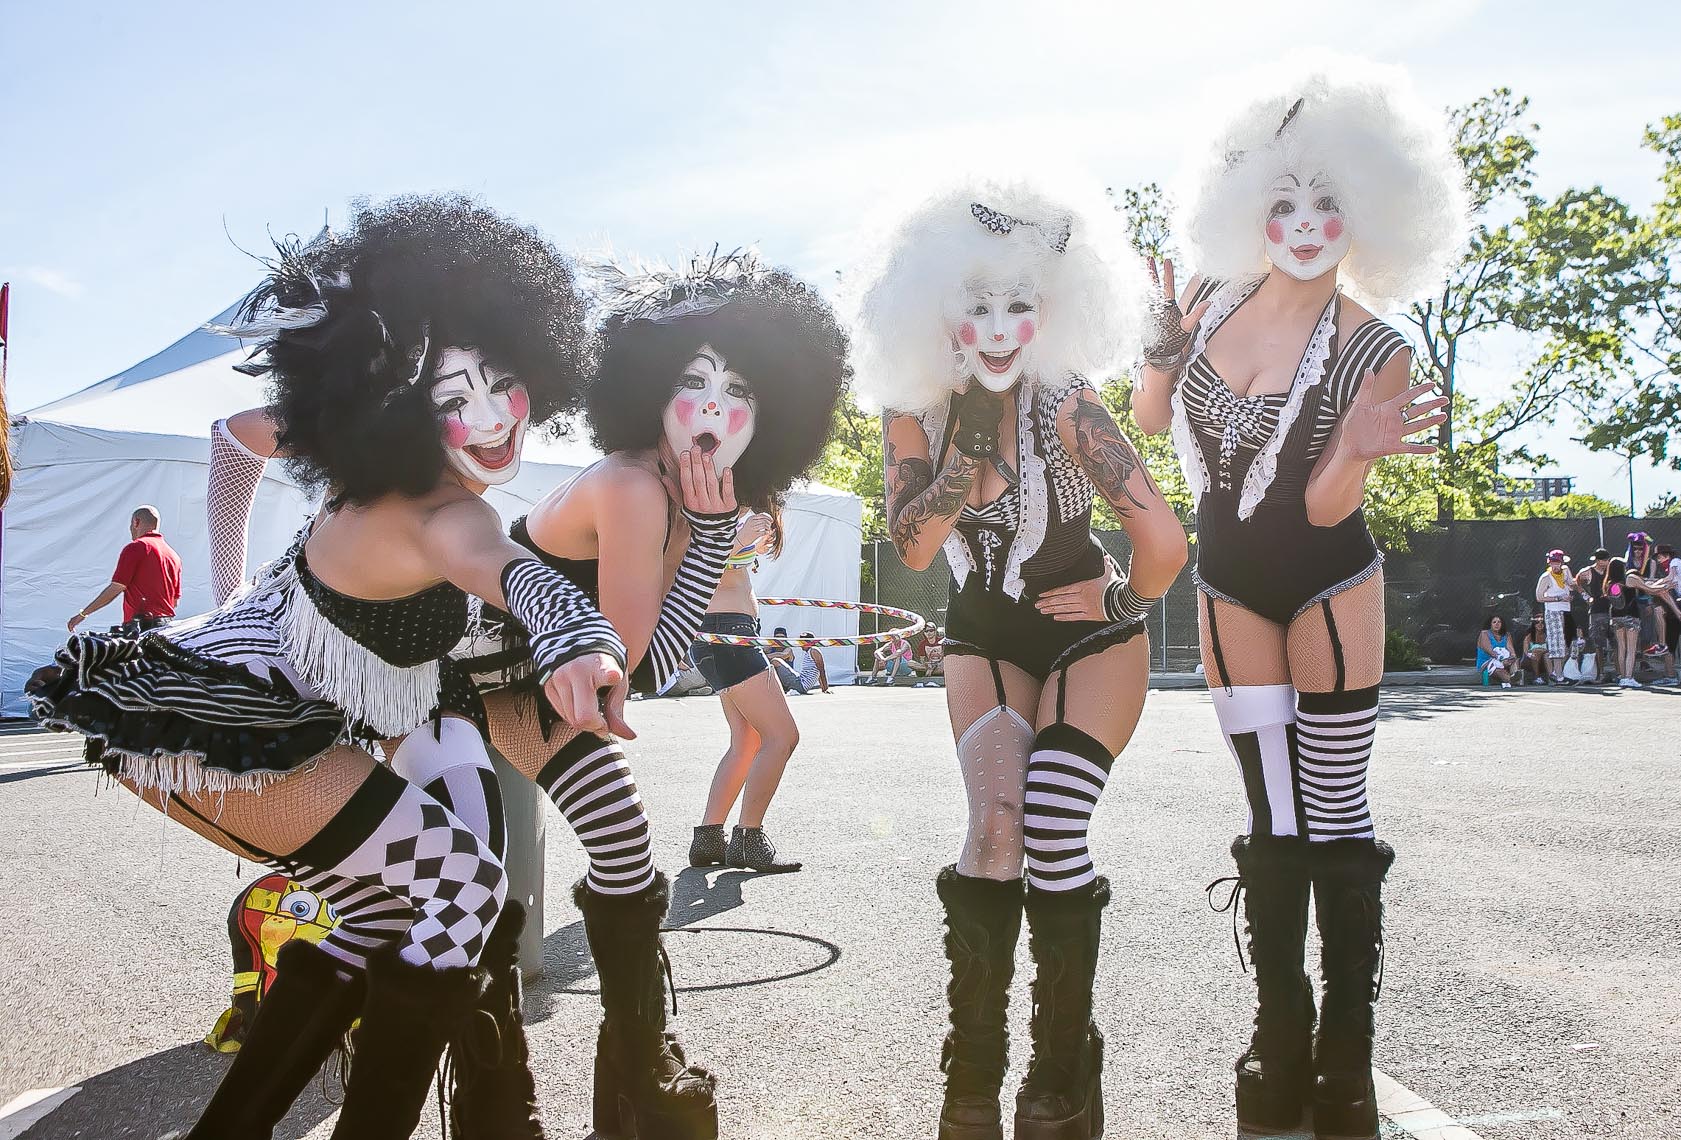 Electric Daisy Carnival by lifestyle and event photographer Deborah Lowery